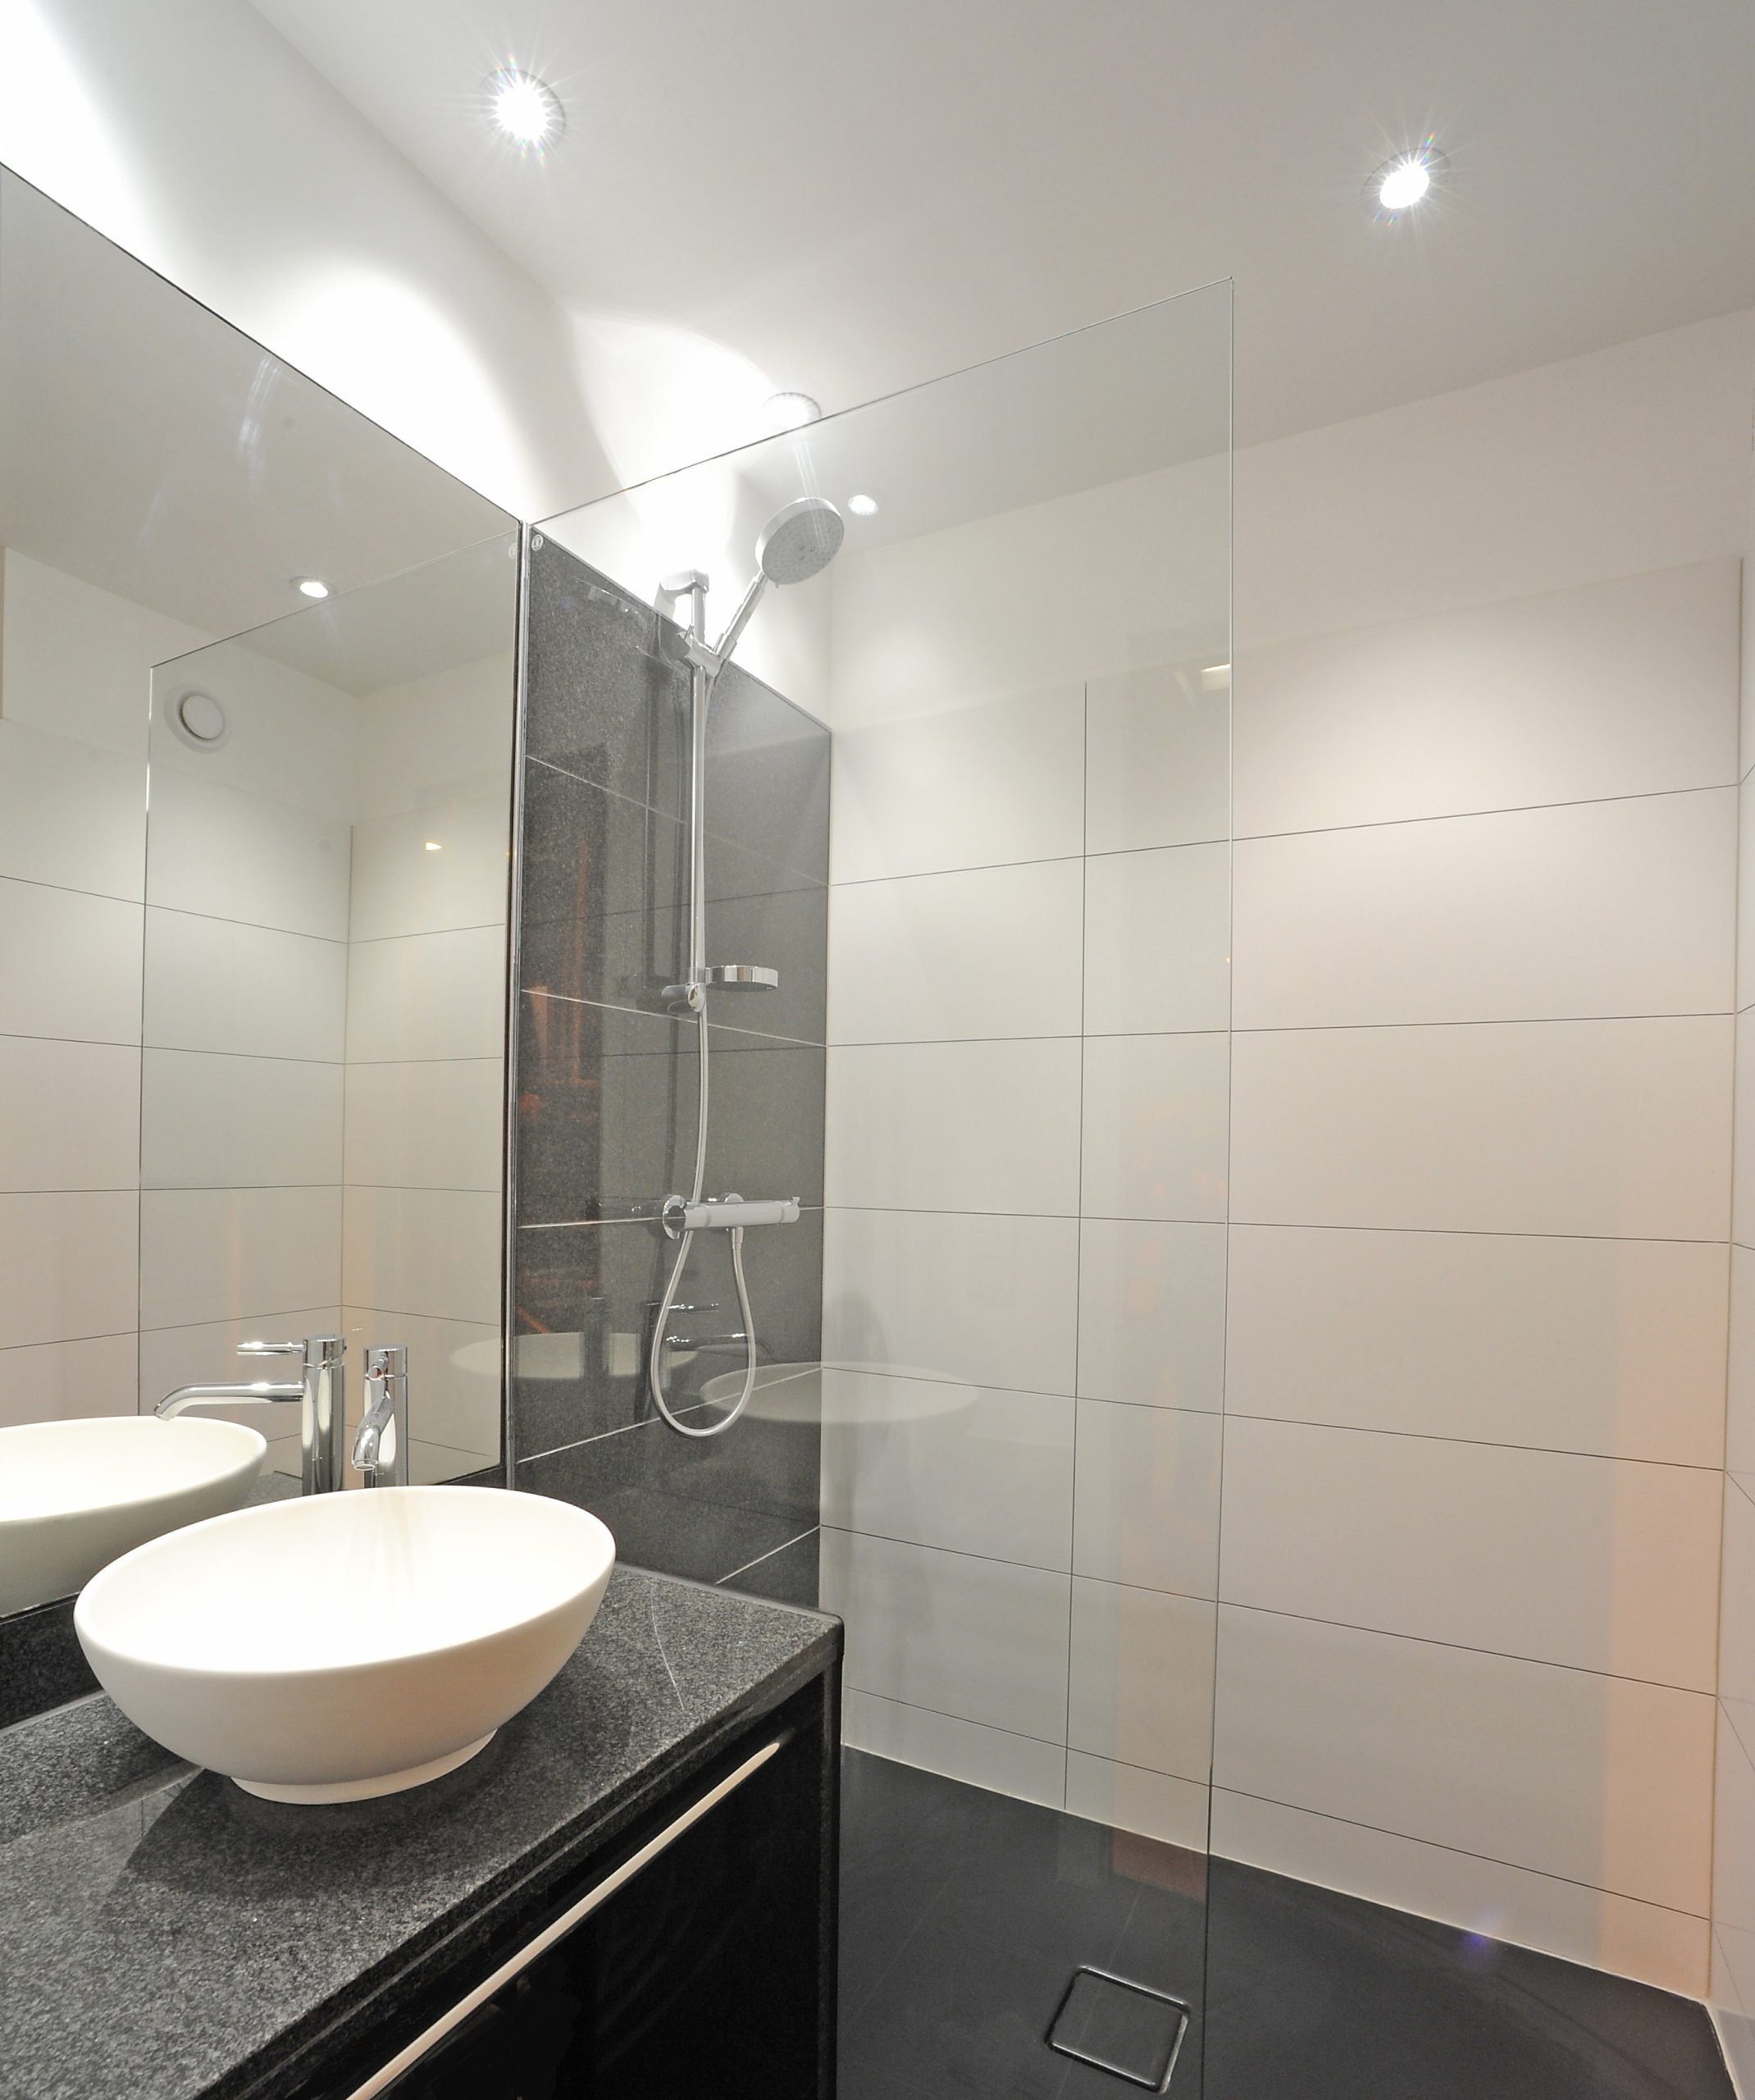 Another Residential Bathroom Pod Contract Won in Manchester